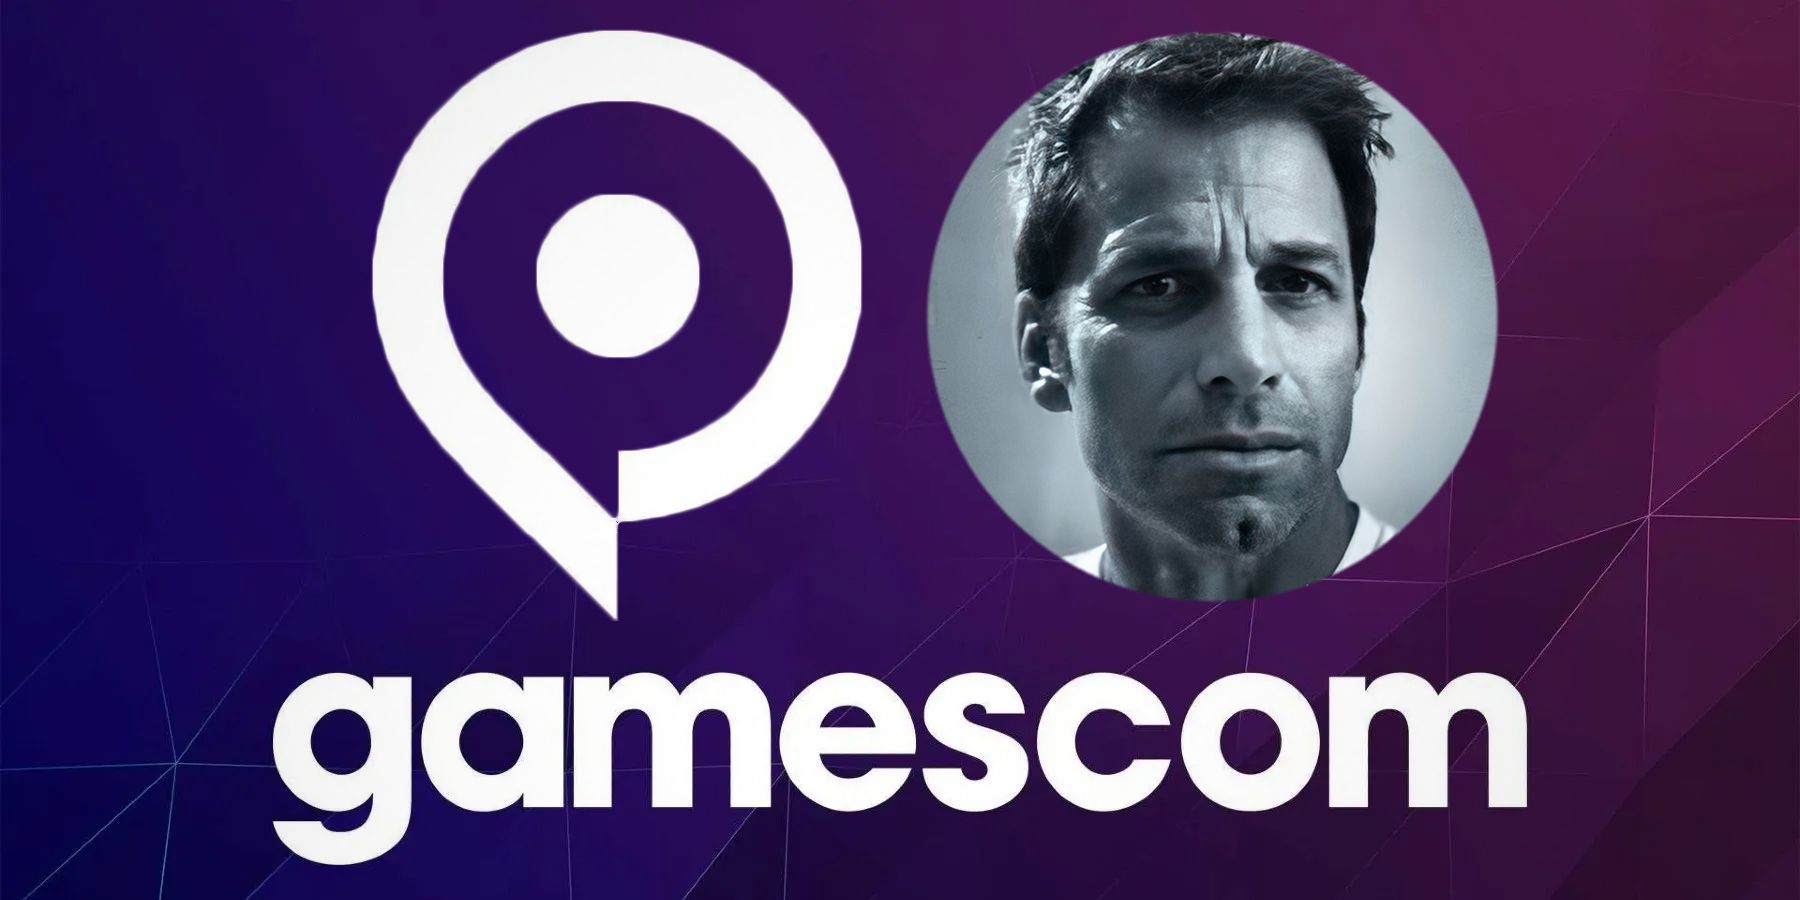 Zack Snyder's Rebel Moon Game Announced at Gamescom